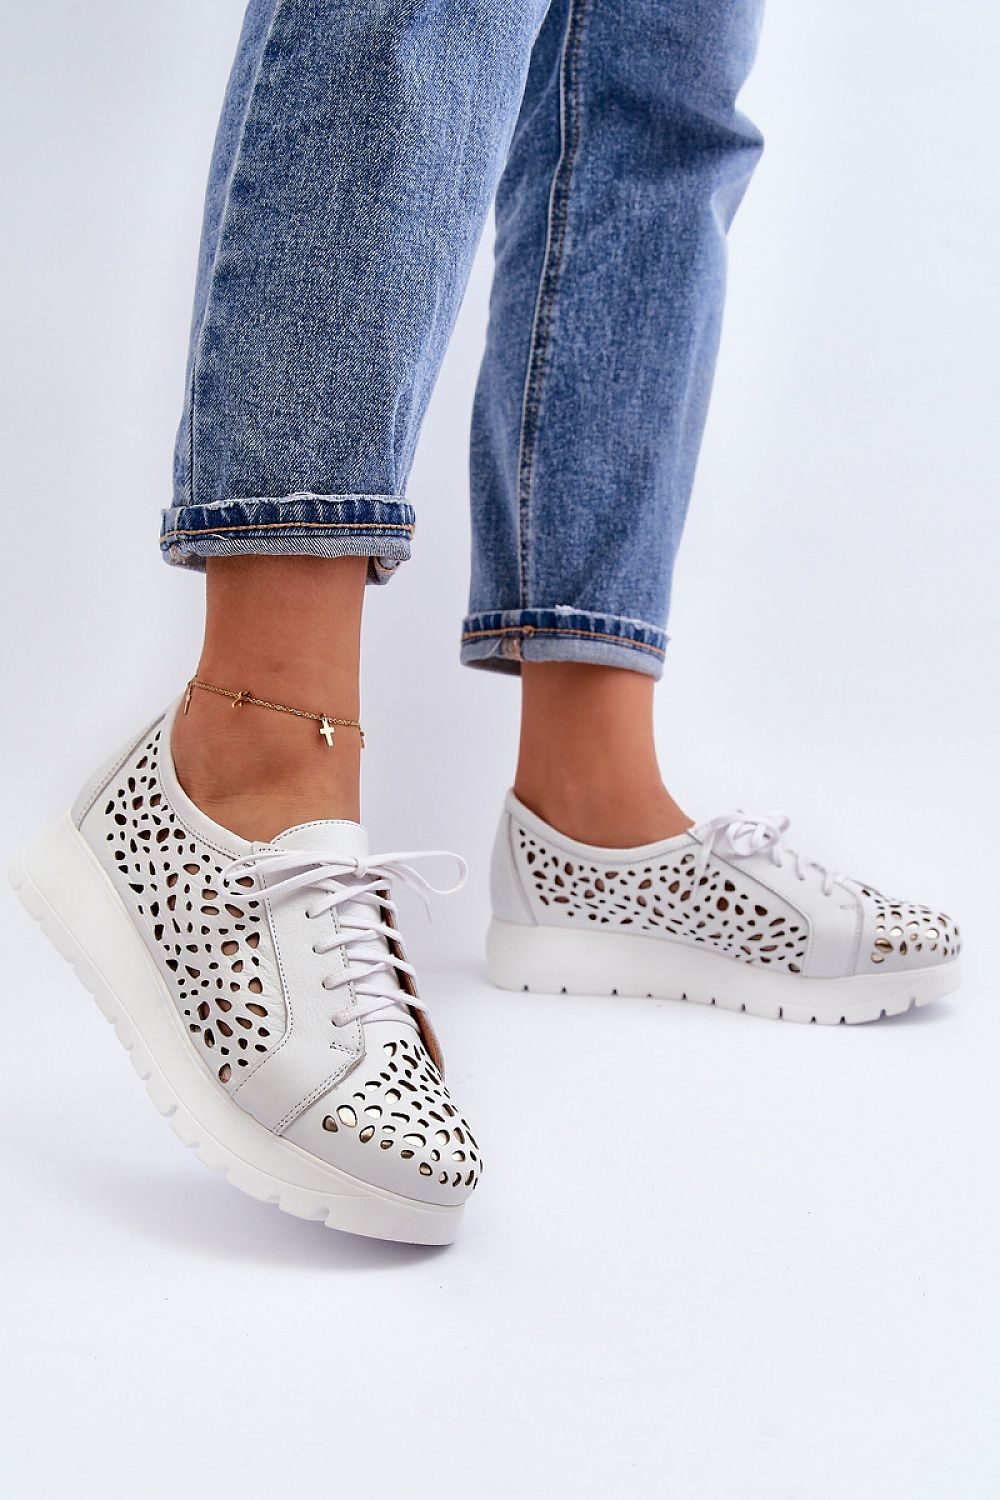 TEEK - Grey Mesh Laced Leather Low Shoes SHOES TEEK MH   